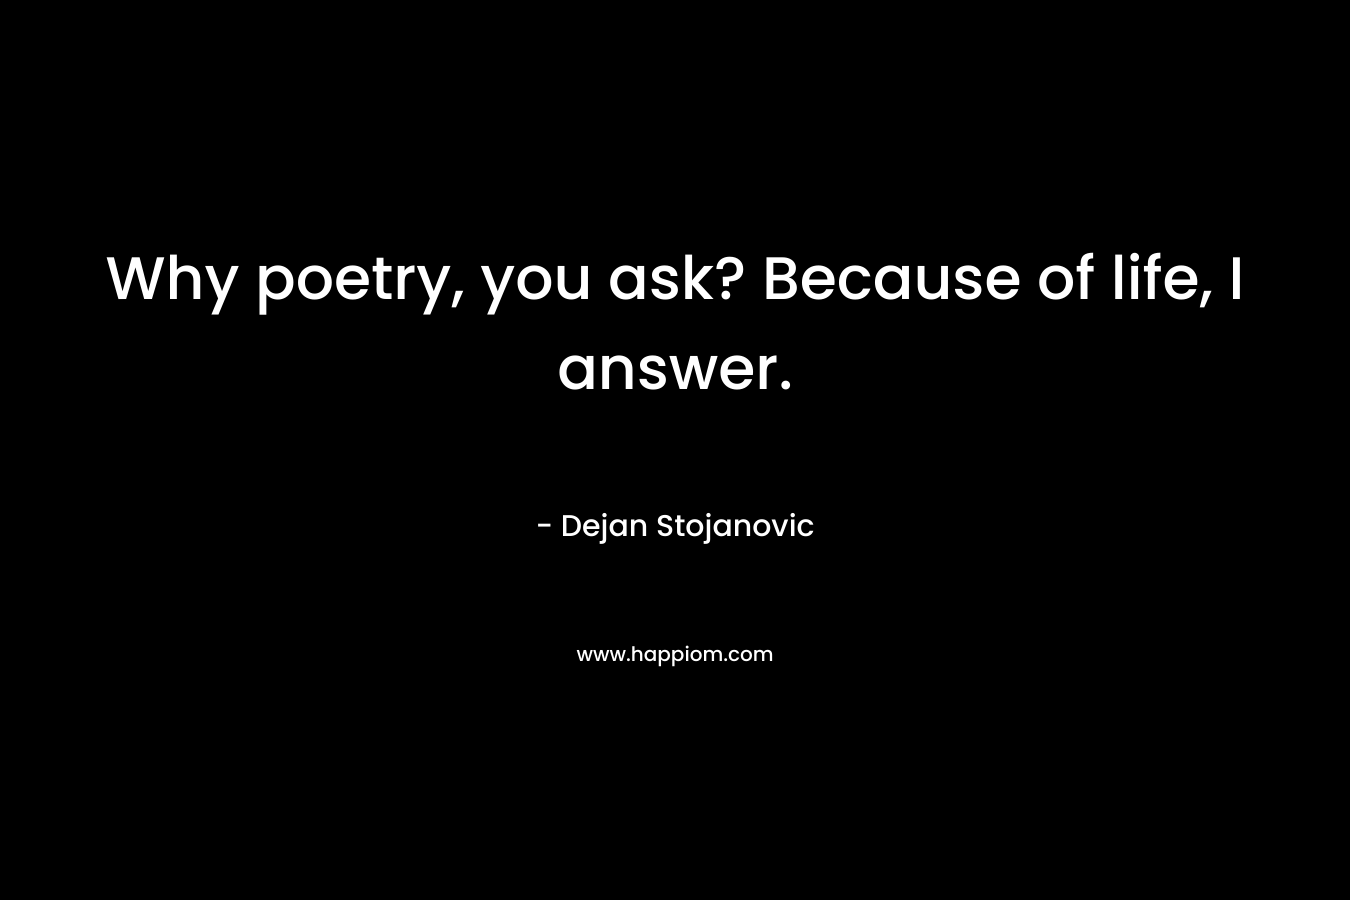 Why poetry, you ask? Because of life, I answer.